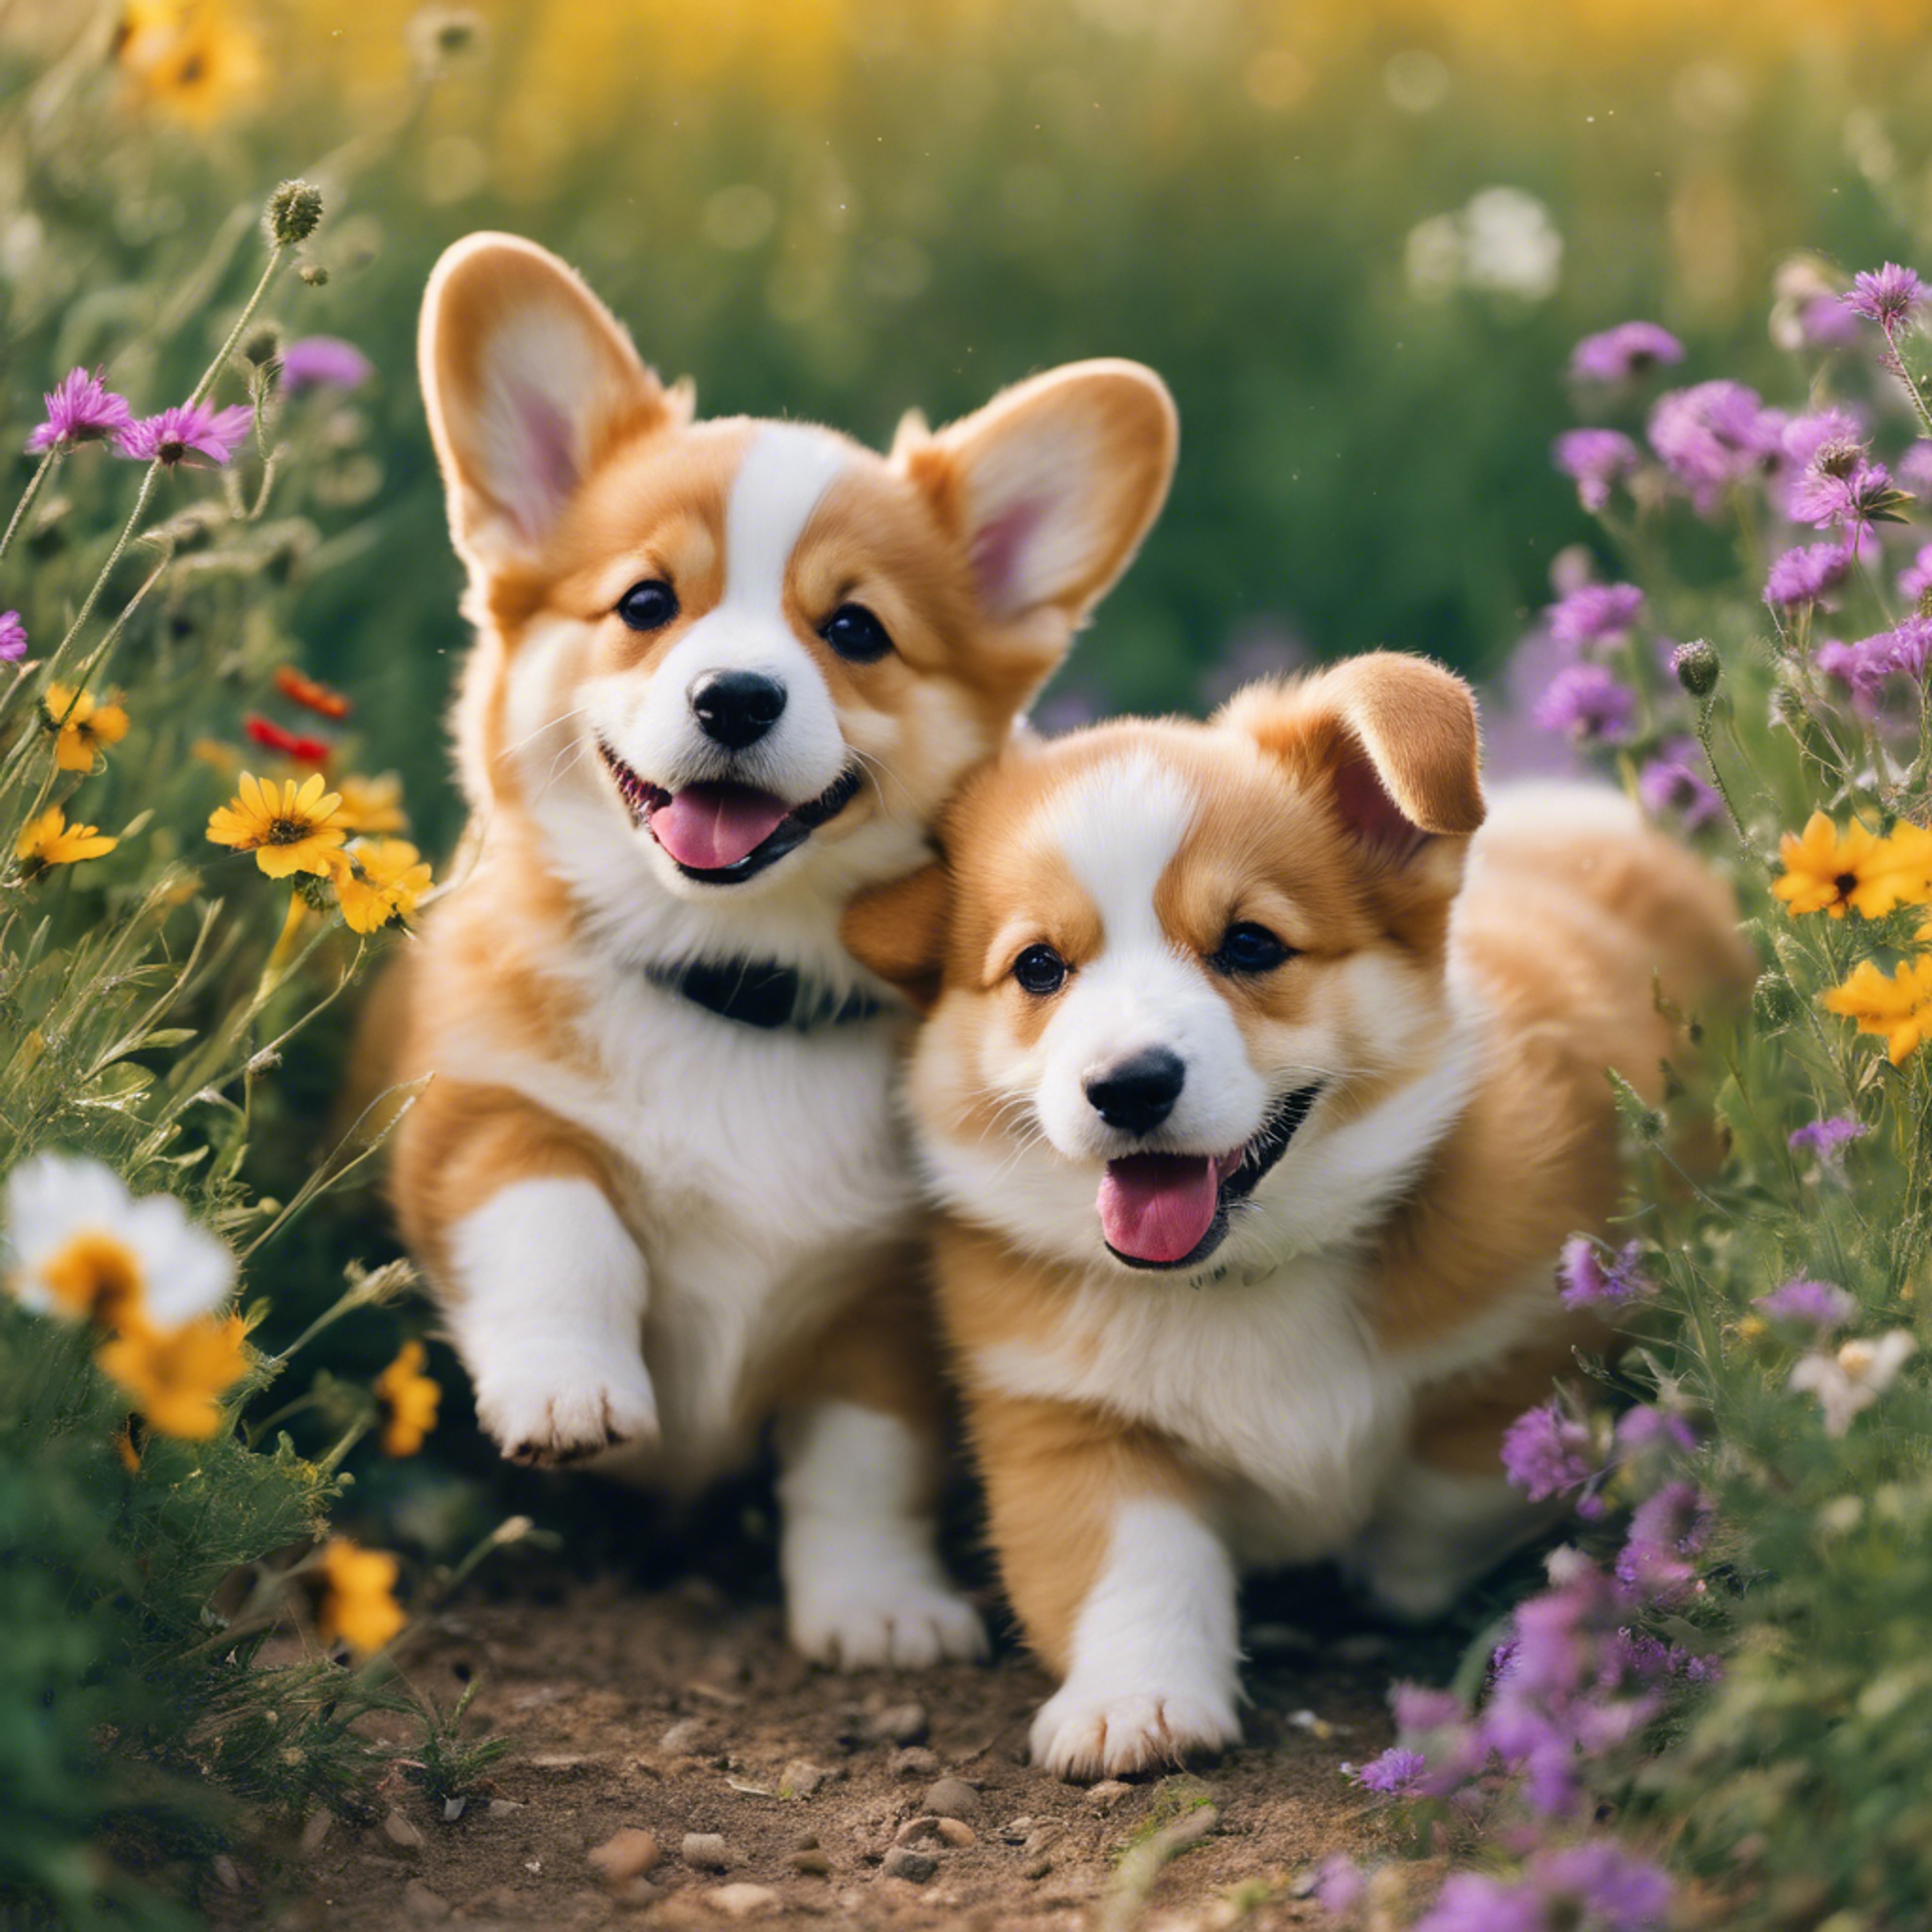 Corgi puppies frolic in a meadow filled with colourful wildflowers. Ფონი[ff39099a16654d489ef7]